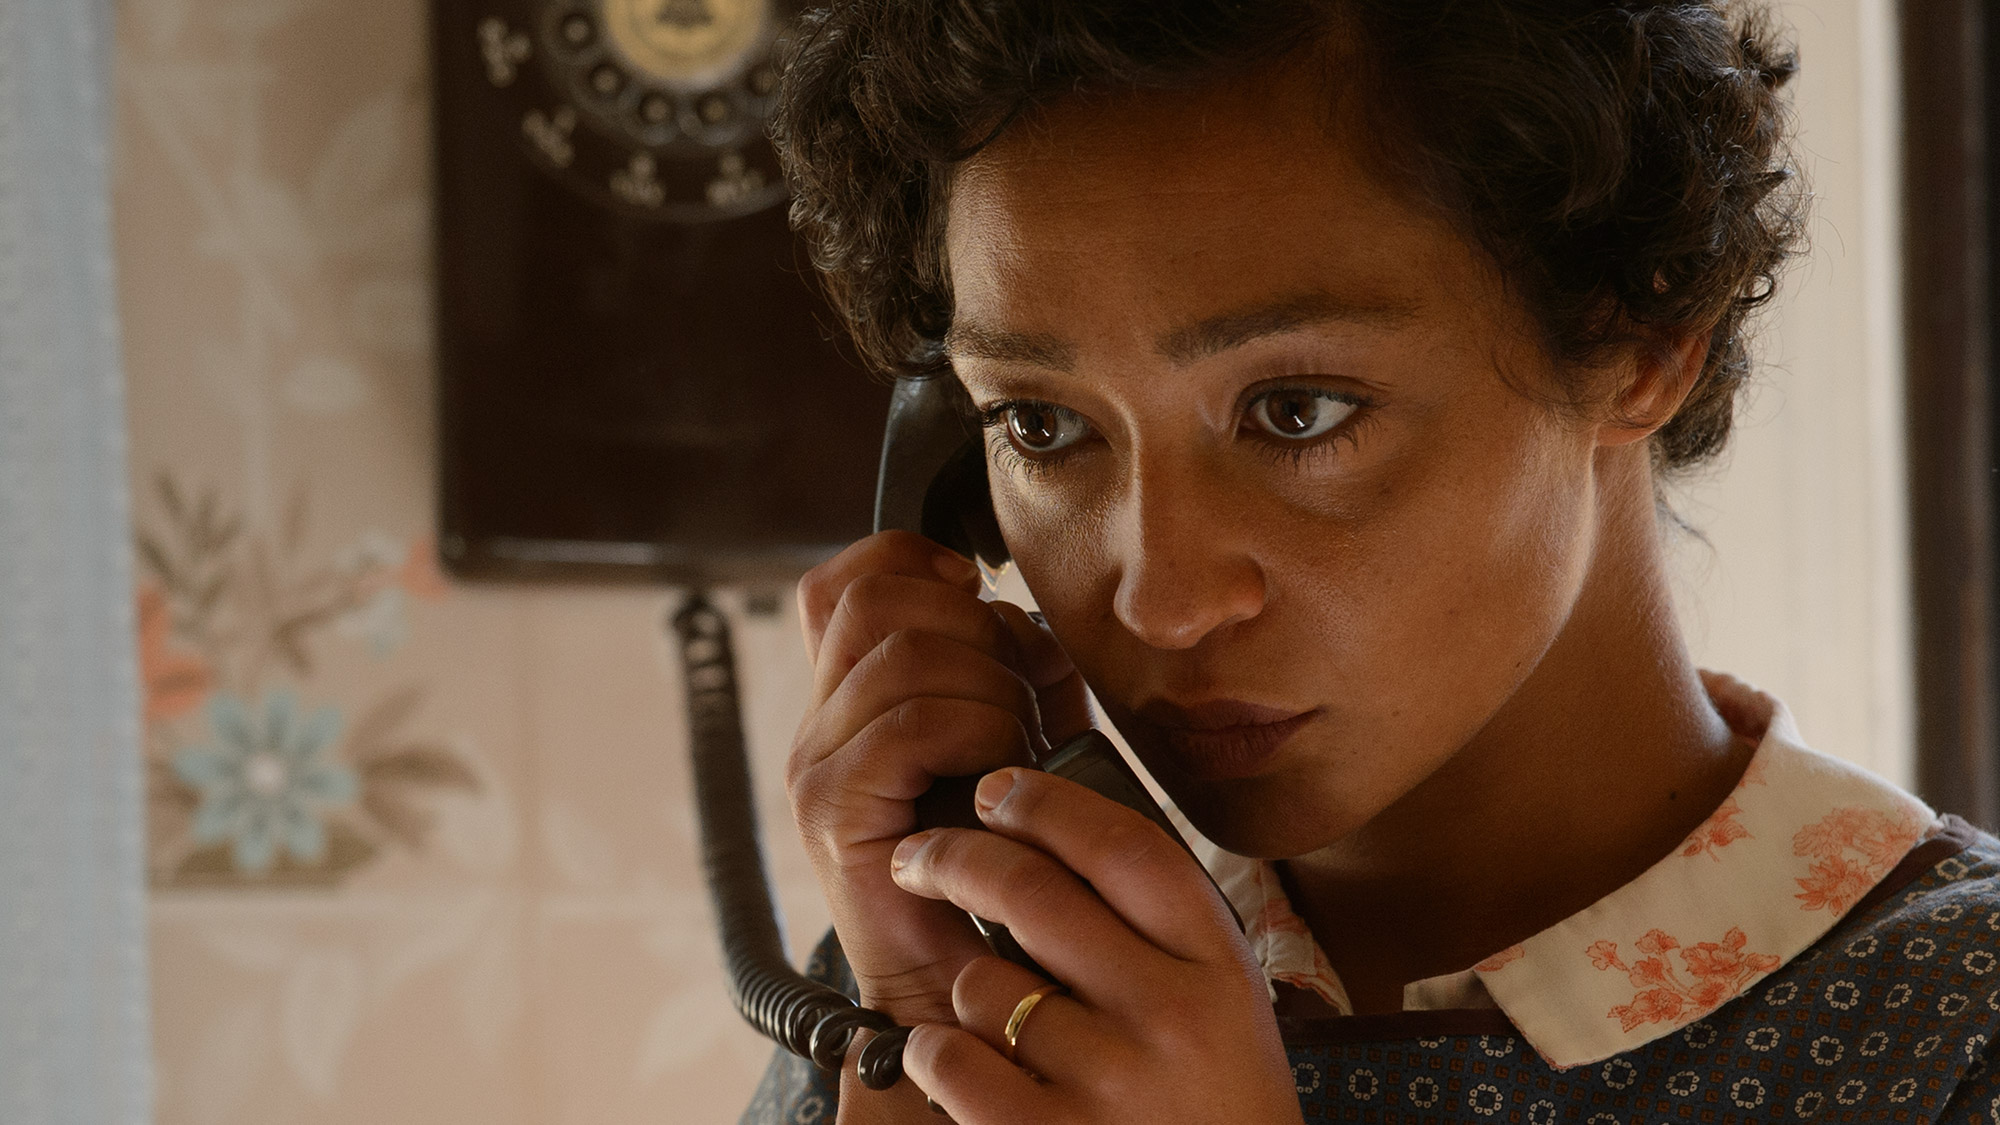 Happy 40th birthday to Ruth Negga!

An underrated, but truly outstanding actress. 